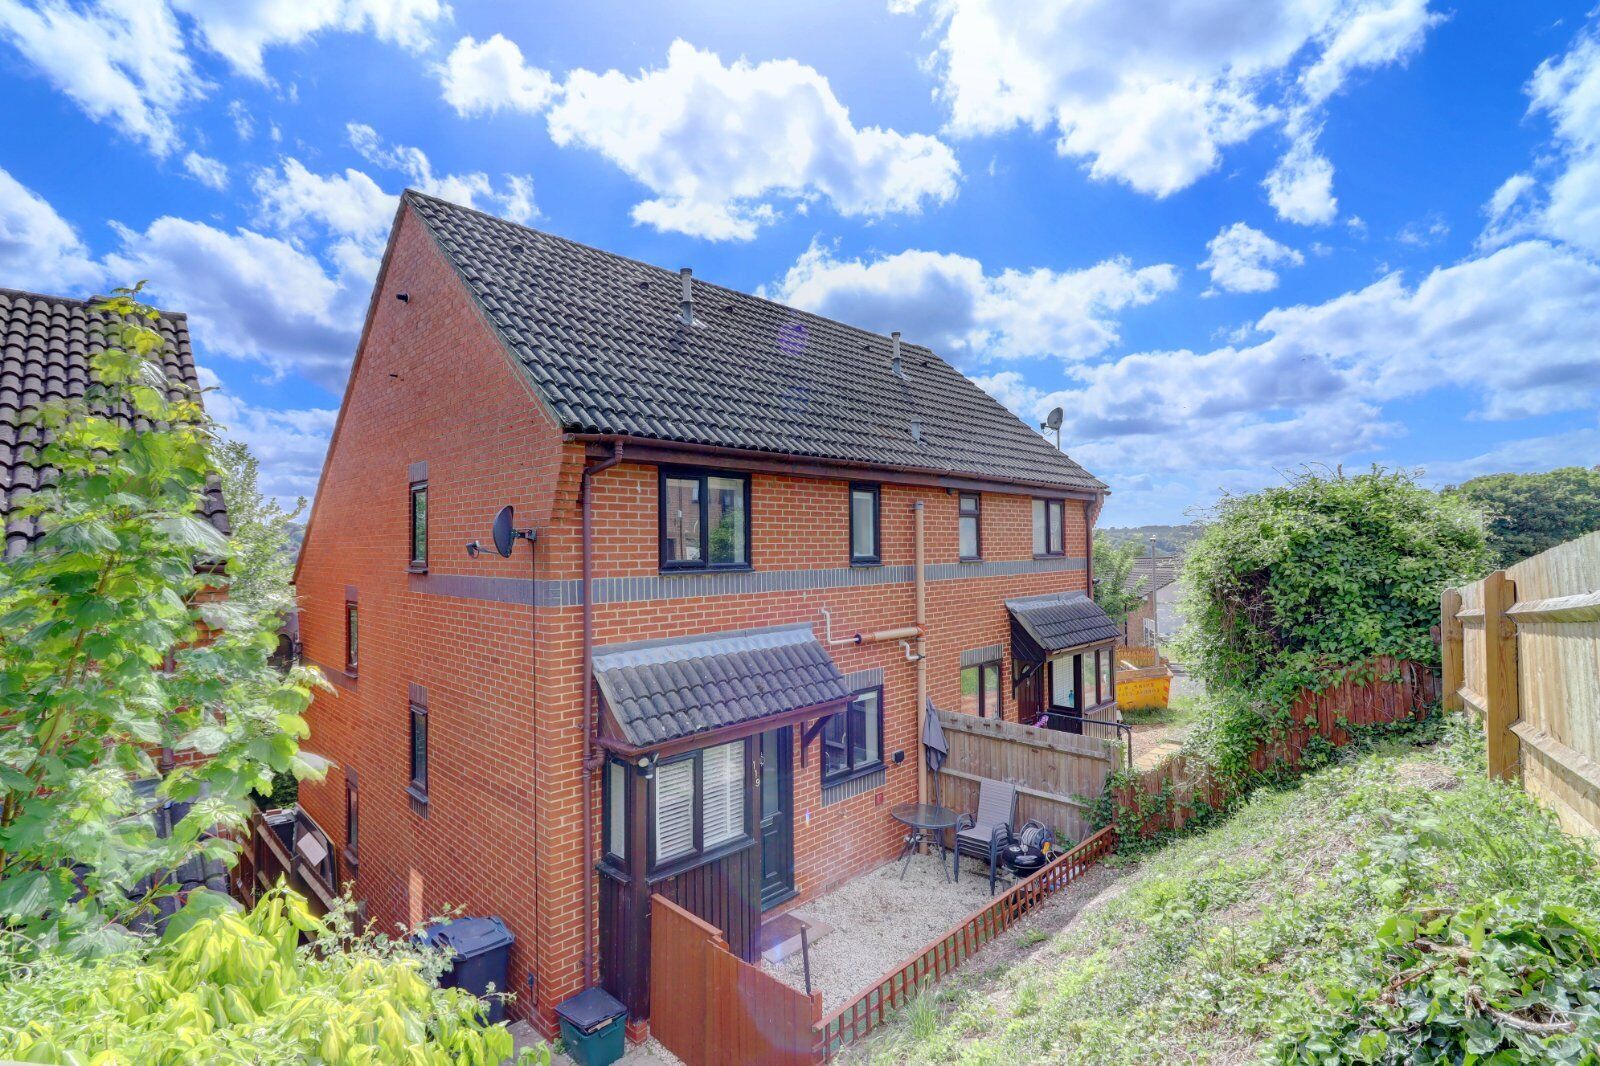 1 bedroom end terraced house to rent, Available now Garratts Way, High Wycombe, HP13, main image